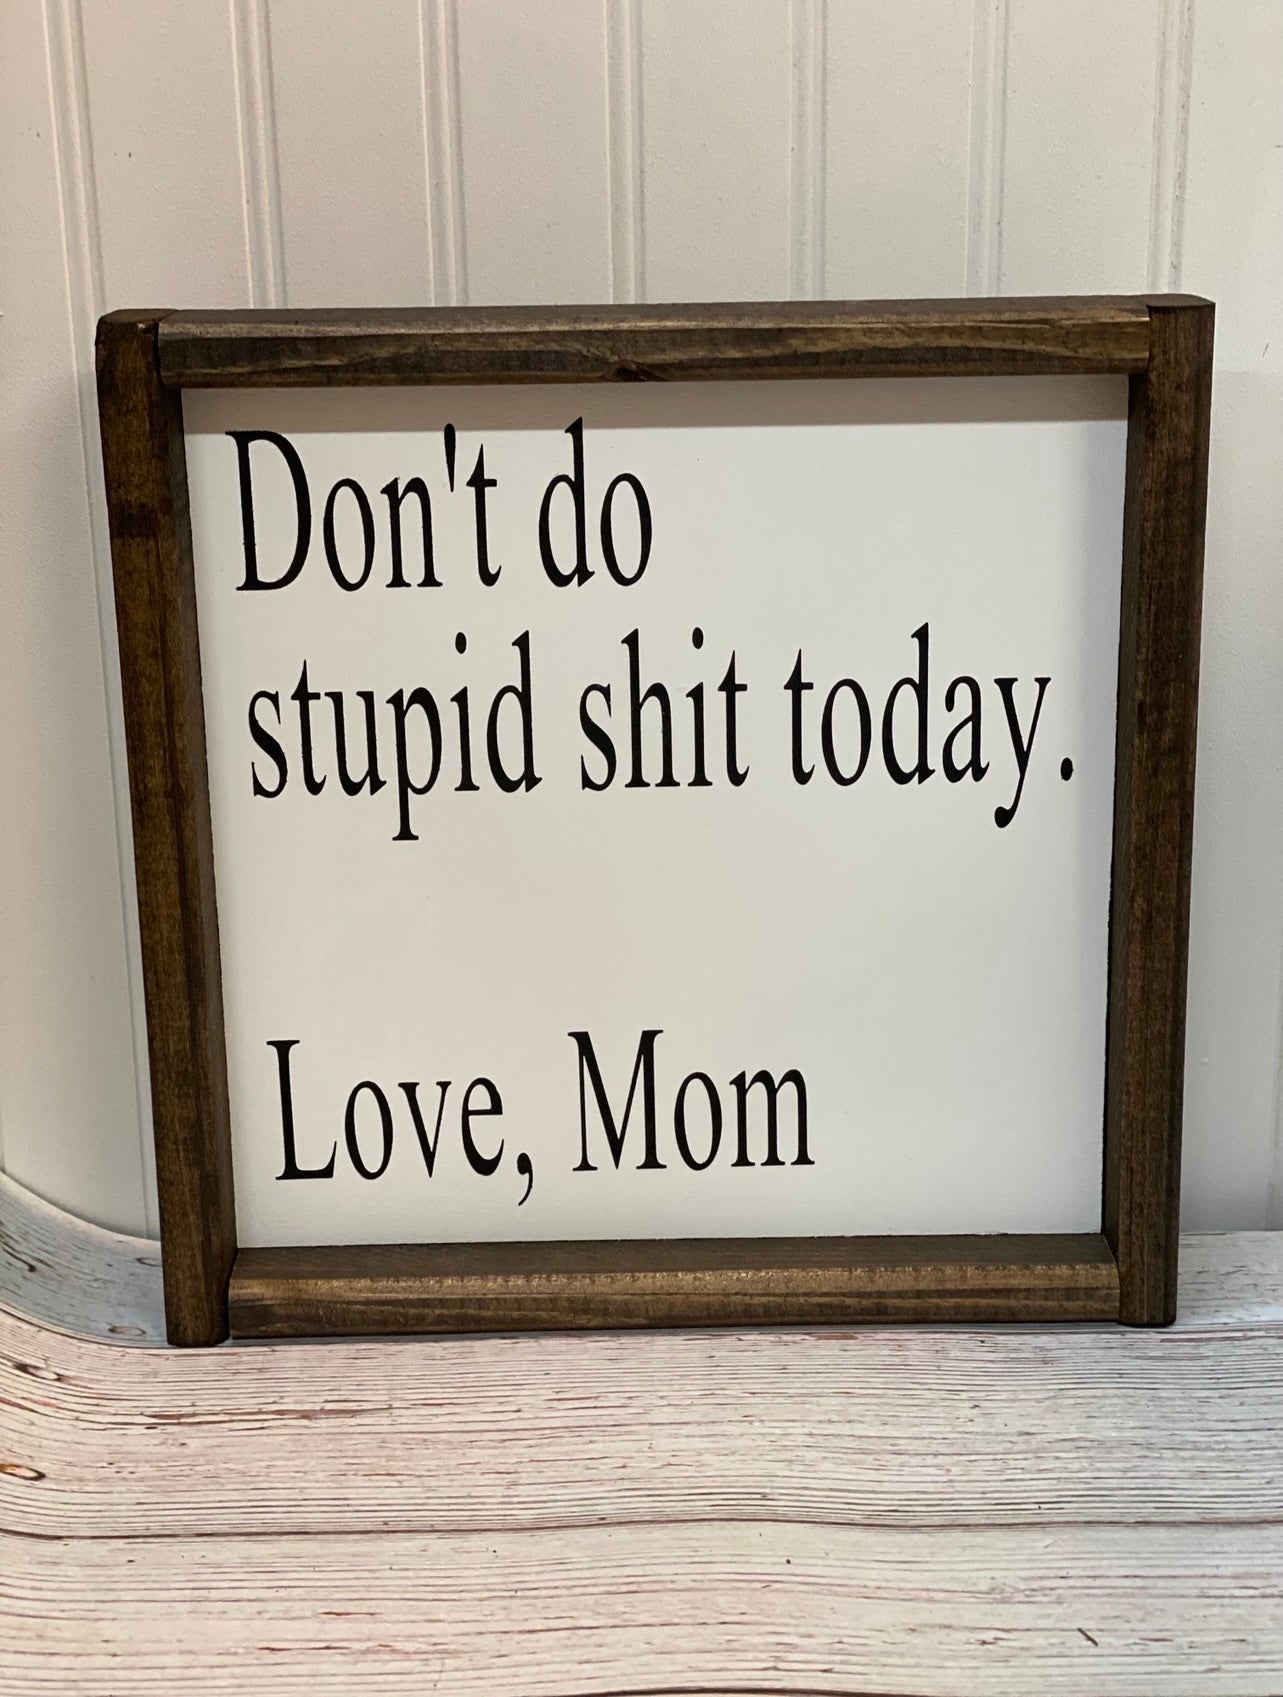 Fast worldwide shipping Don't do stupid shit. Love, Mom (or Dad